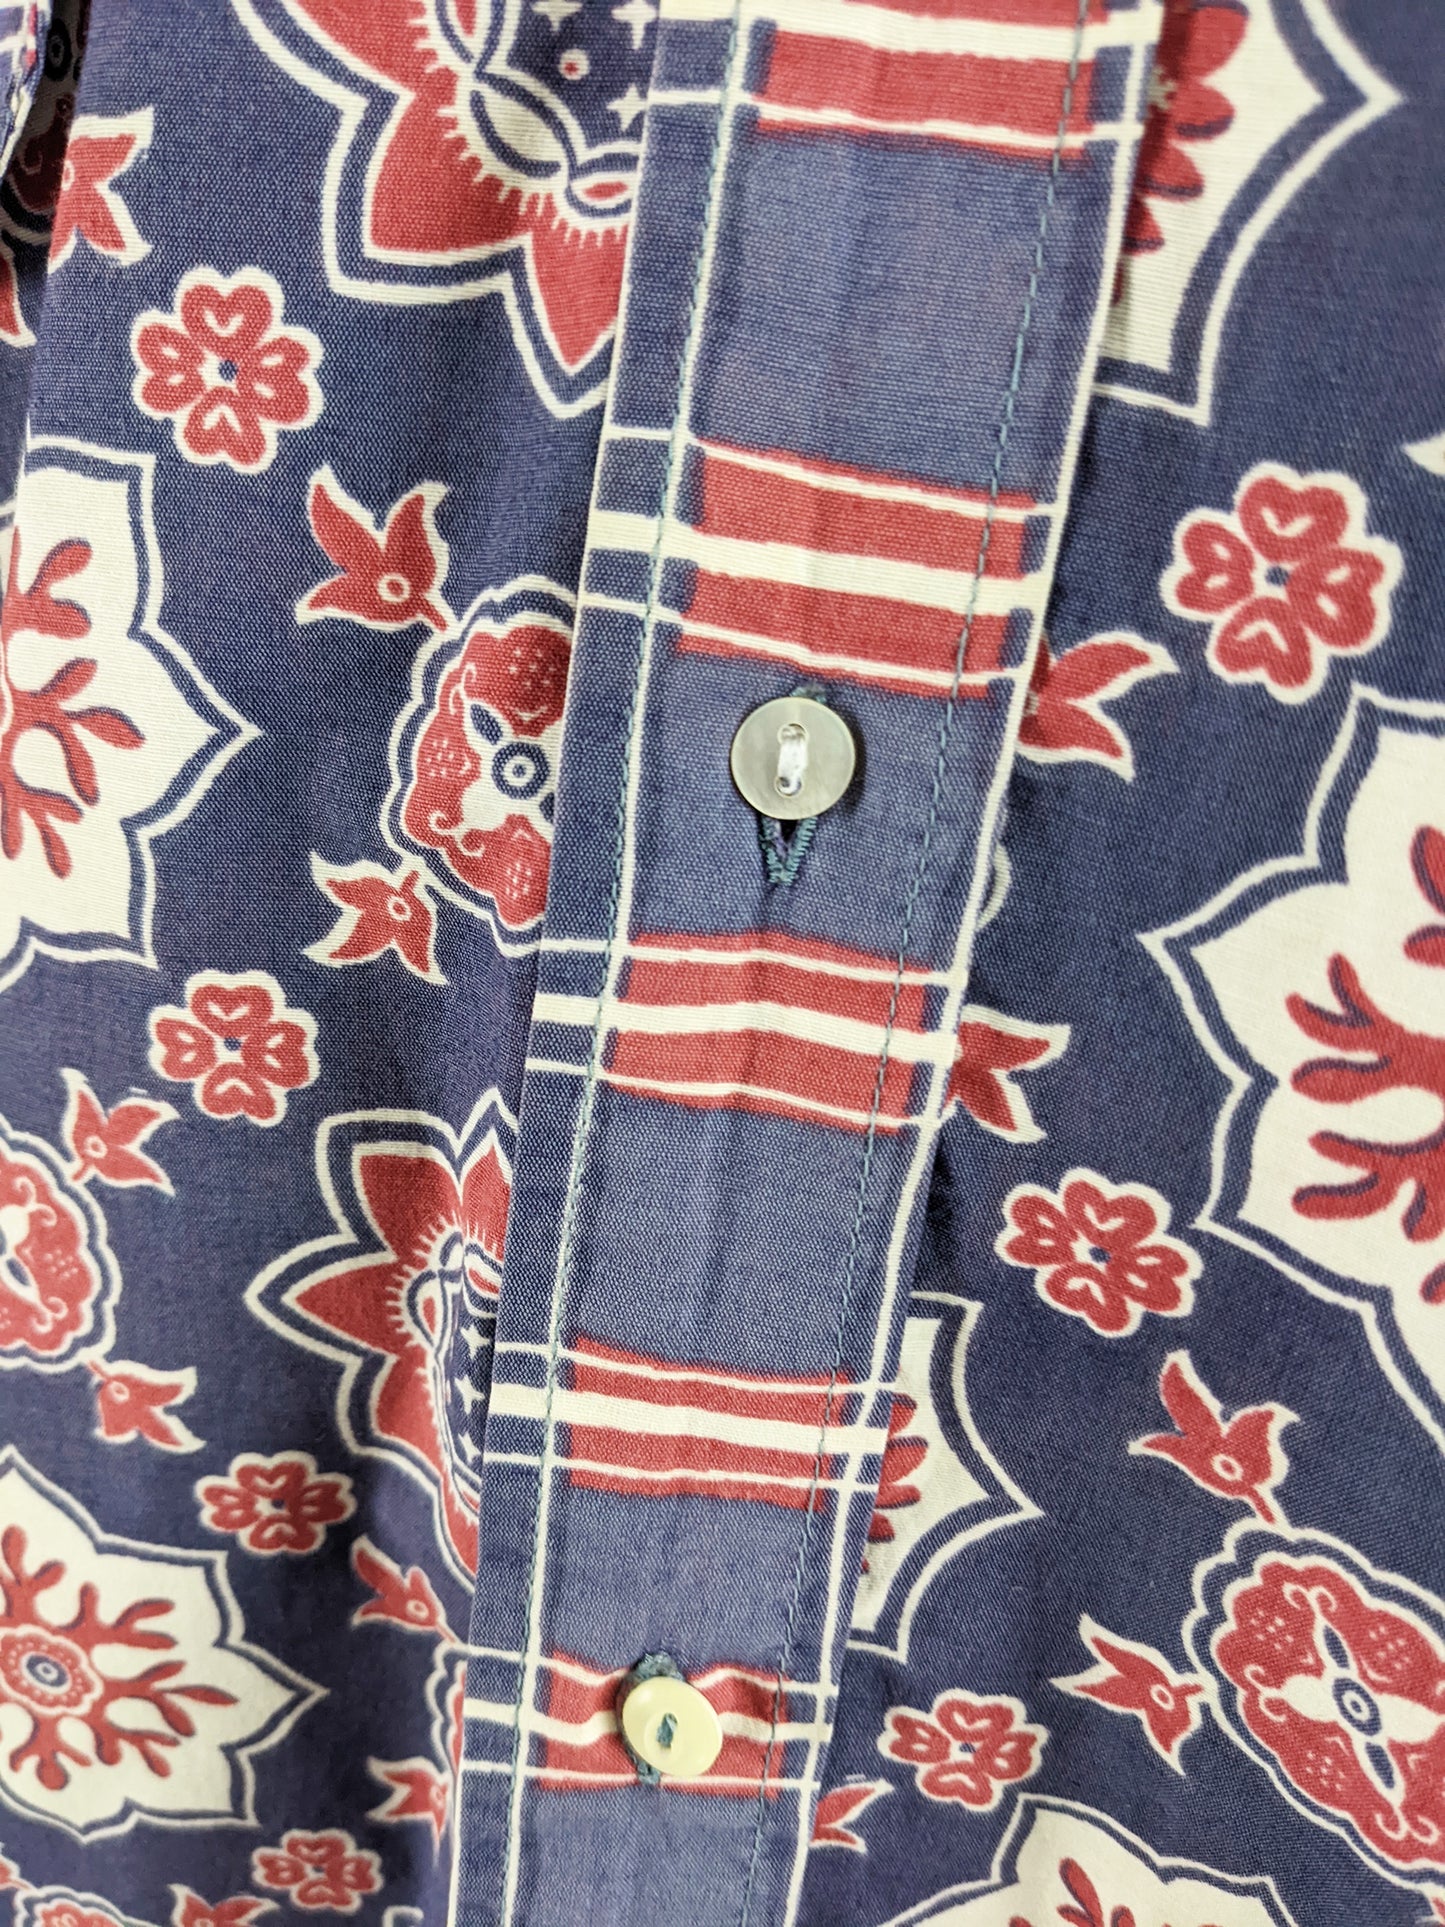 Foxhound Vintage Mens Blue & Red Patterned Shirt, 1980s